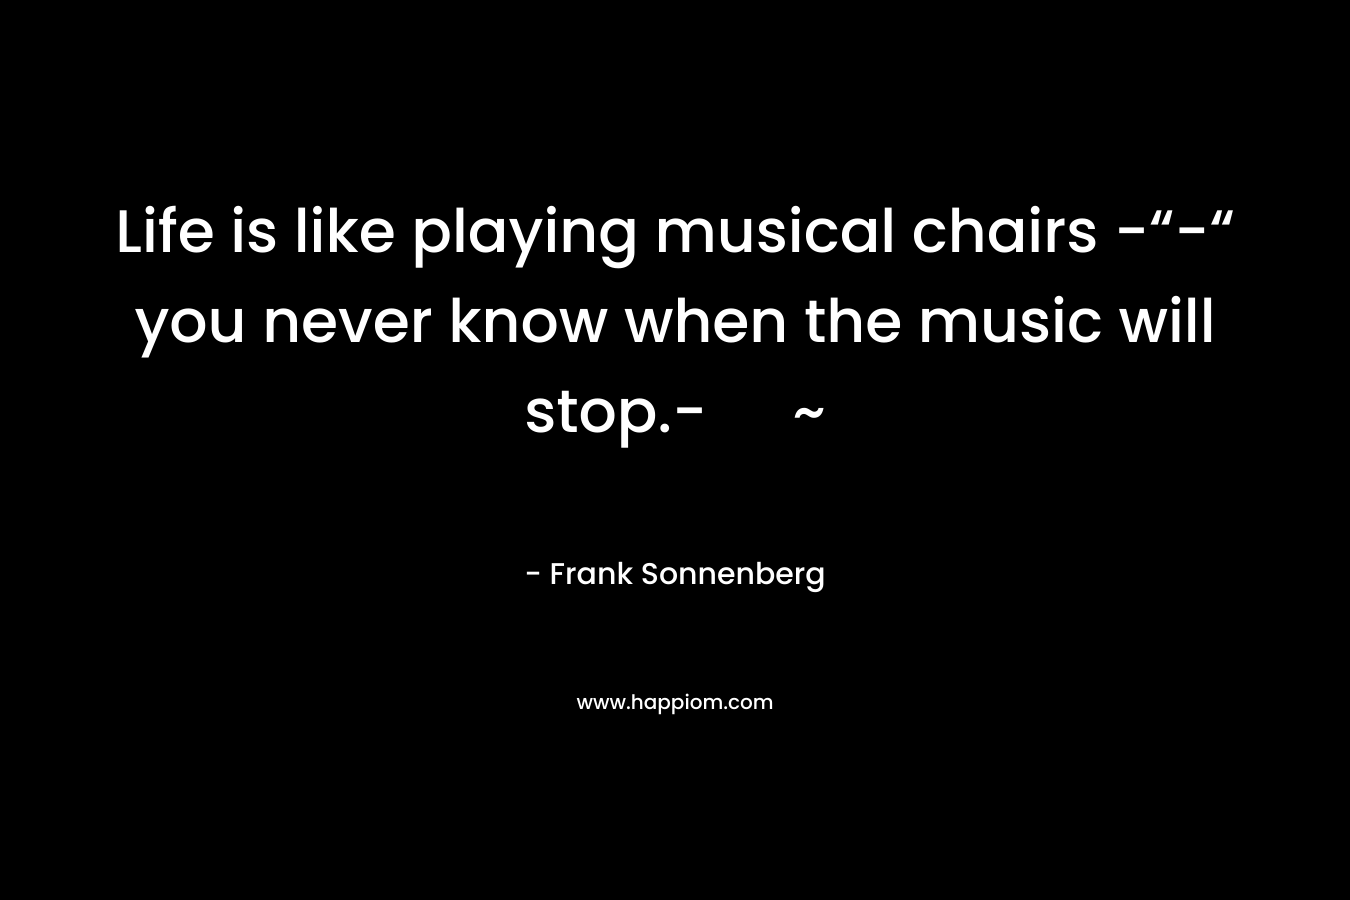 Life is like playing musical chairs -“-“ you never know when the music will stop.- ~